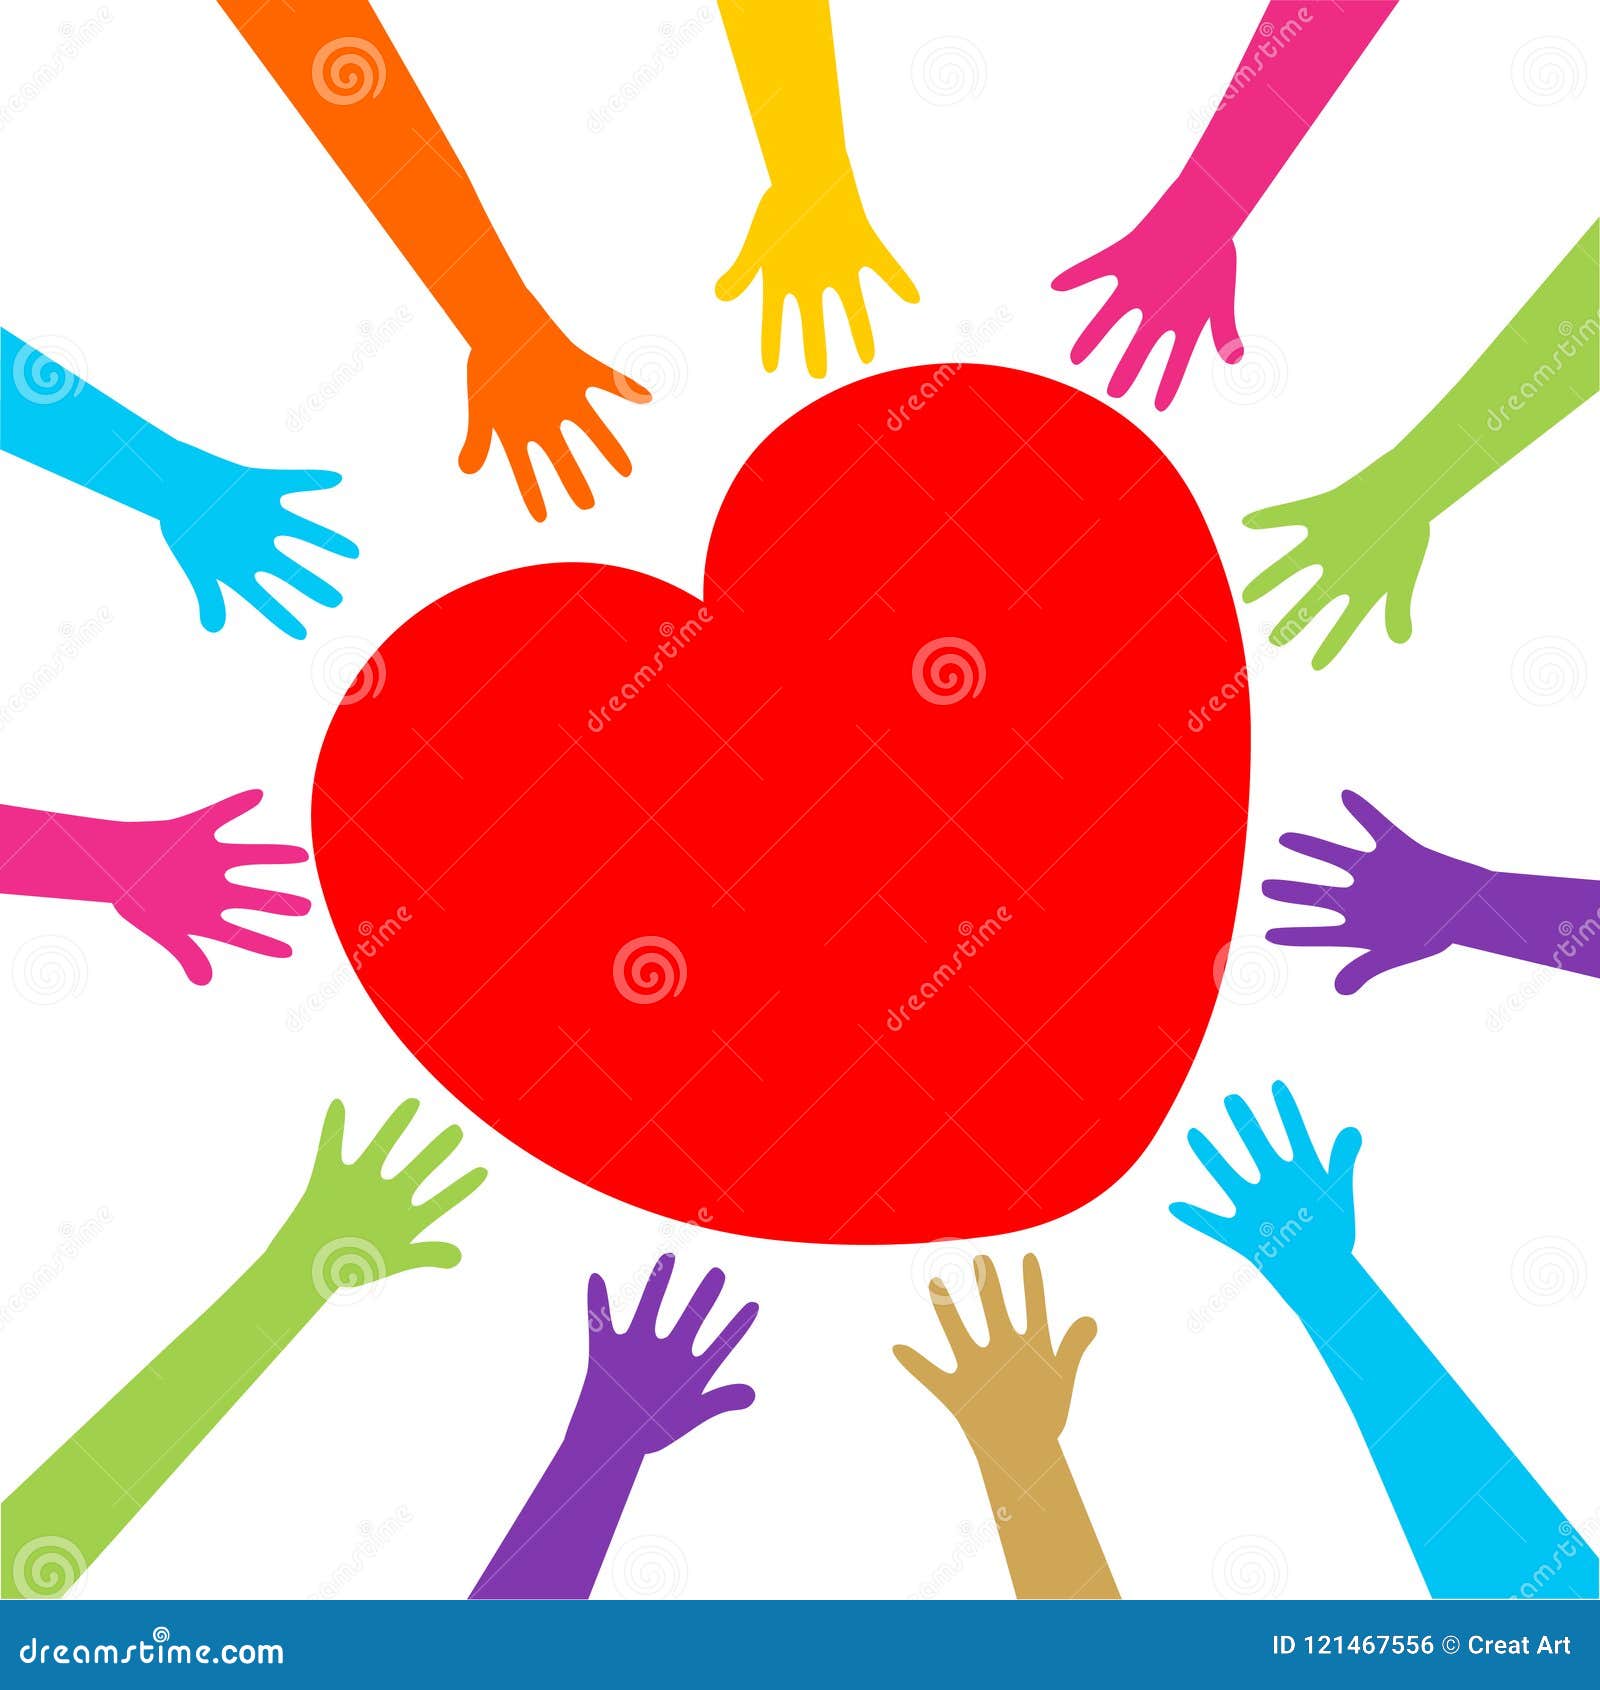 Hands and Heart.Healthy Heart Icon Vector. Stock Vector - Illustration ...